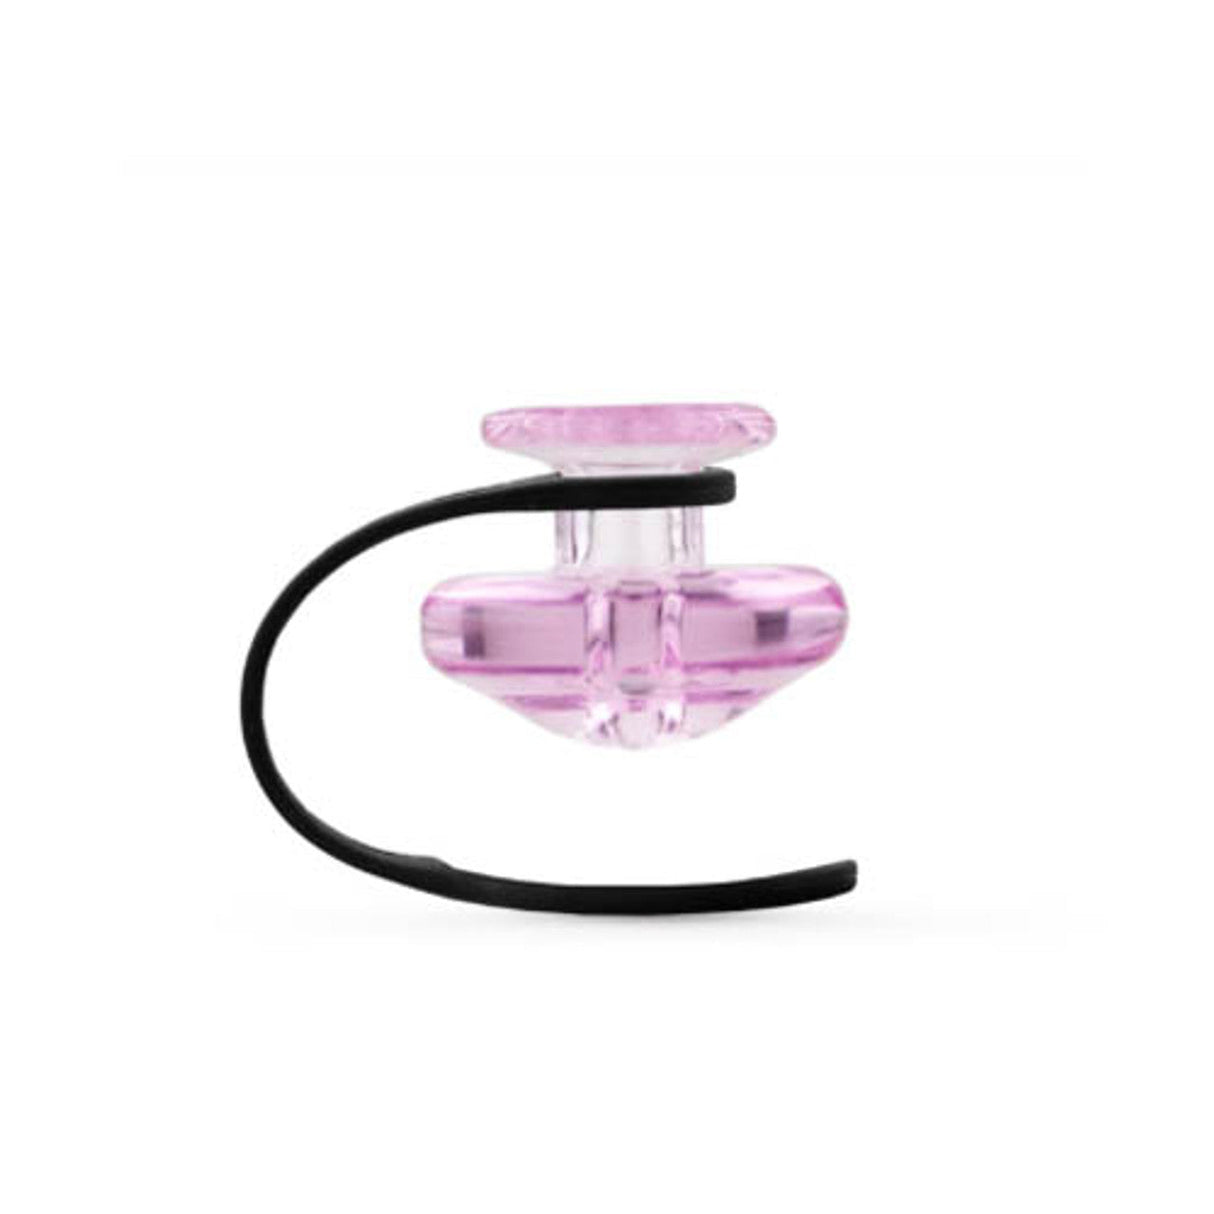 Puffco Peak Carb Cap & Tether in Pink Borosilicate Glass, Front View on Seamless White Background